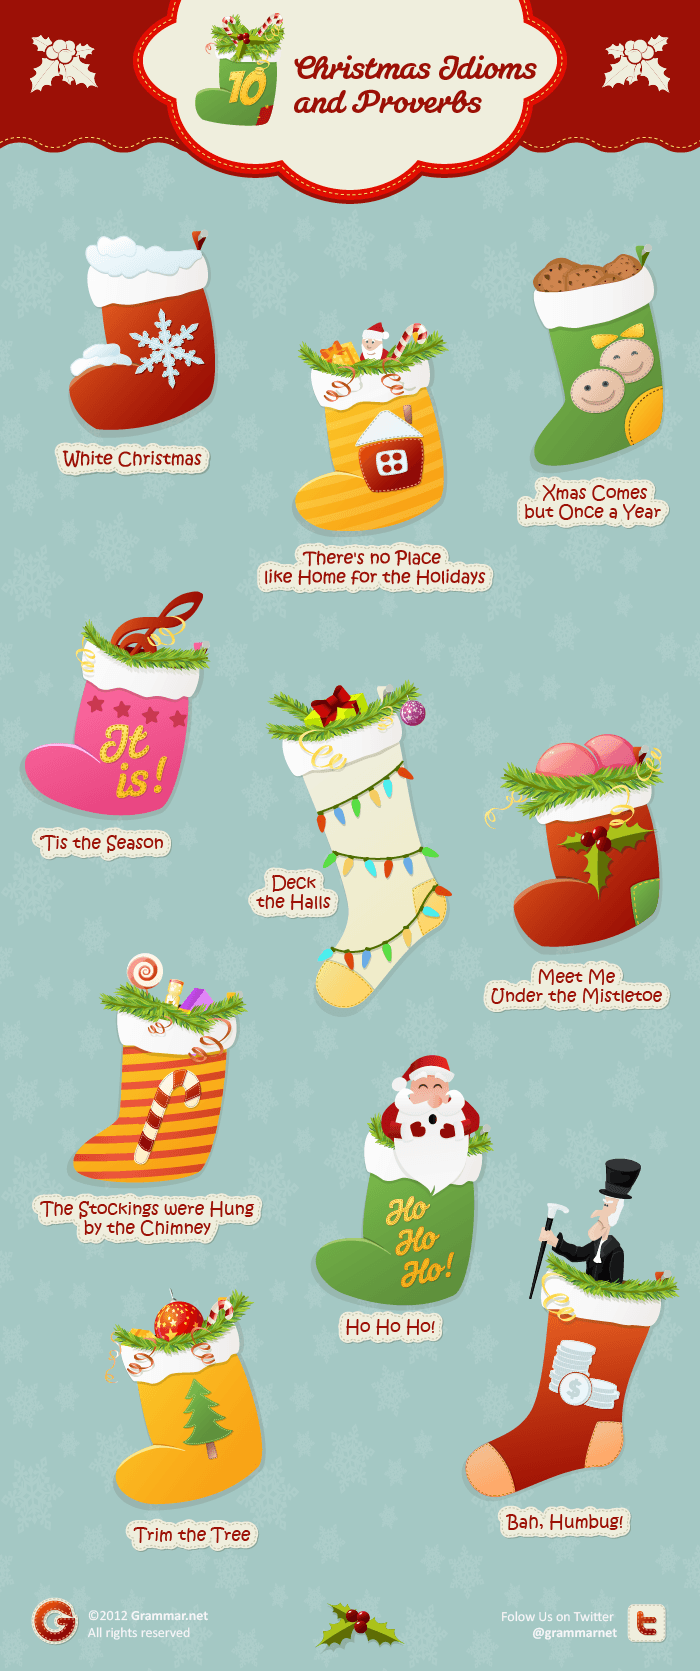 Guide Of Christmas-Related Things And Phrases